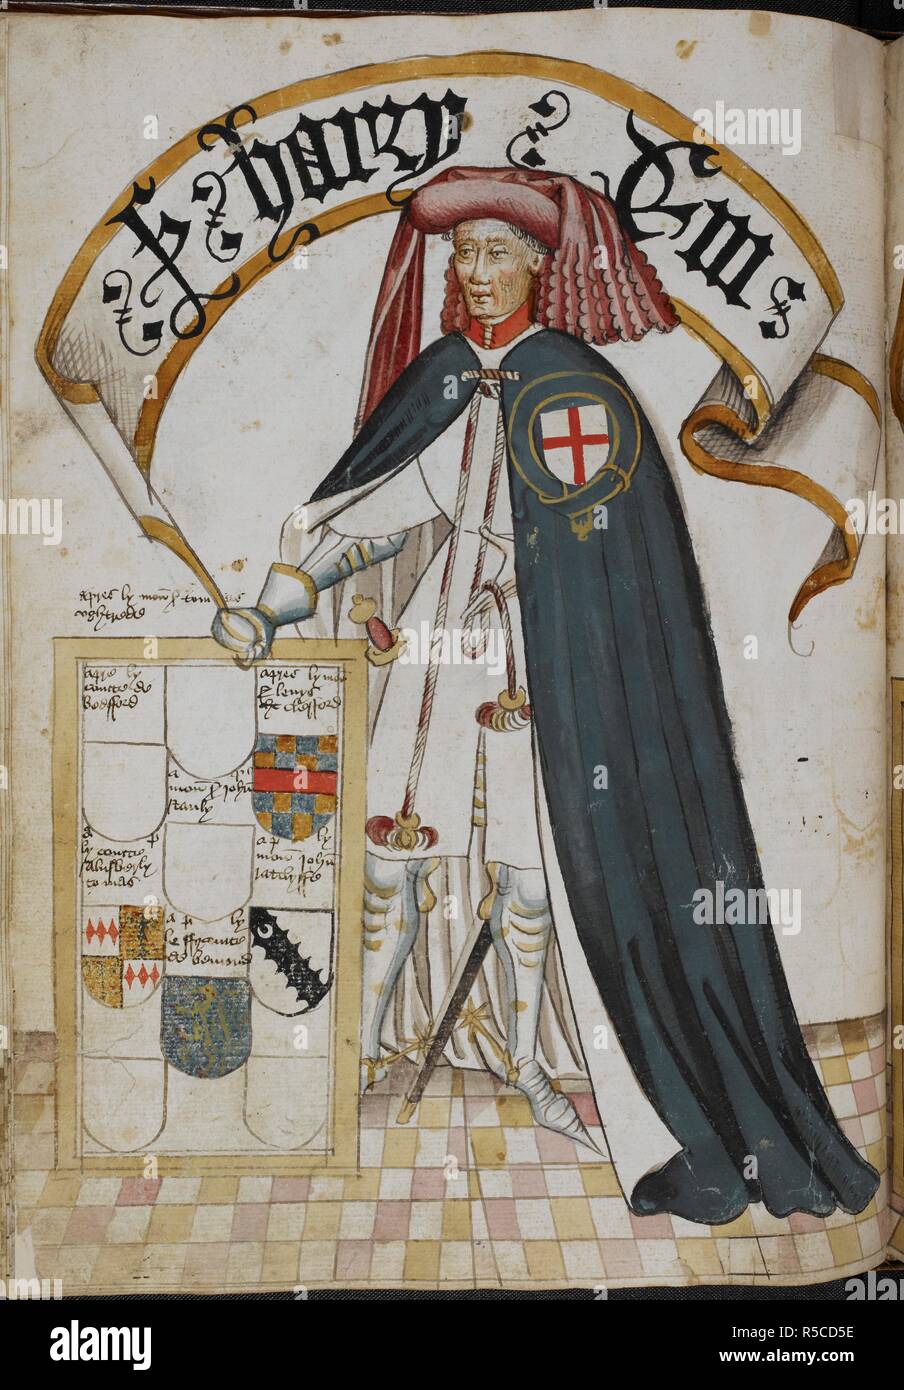 Sir Harry Eam (unfinished), of the Order of the Garter, wearing a blue Garter mantle over plate armour and surcoat displaying his arms. . Pictorial book of arms of the Order of the Garter ('William Bruges's Garter Book'). England, S. E. (probably London); c. 1430- c. 1440 (before 1450). Source: Stowe 594 f.19v. Stock Photo